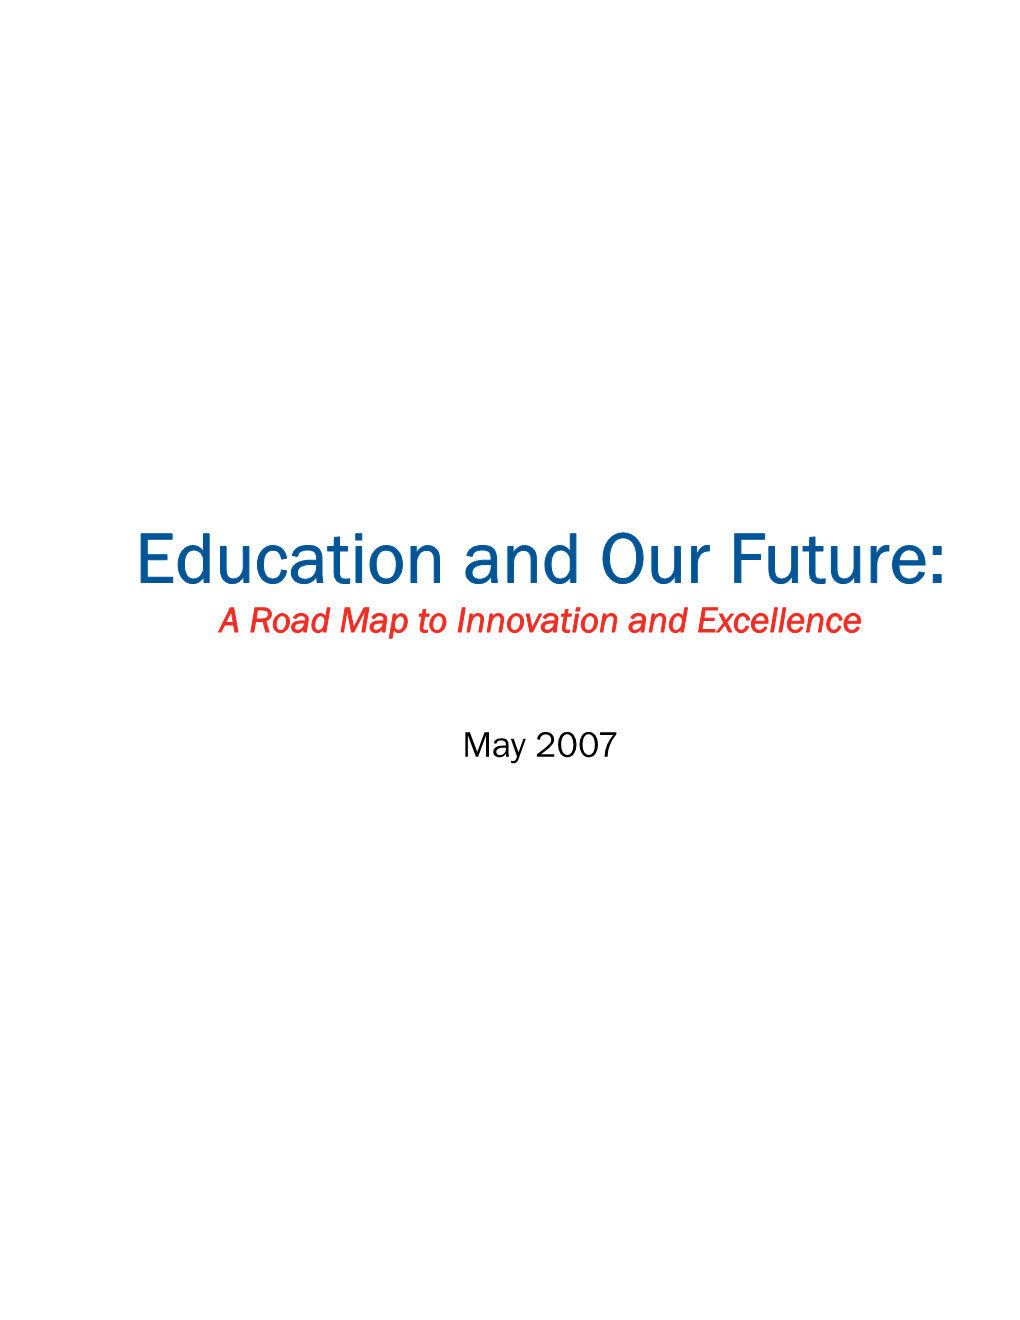 Education and Our Future: a Road Map to Innovation and Excellence